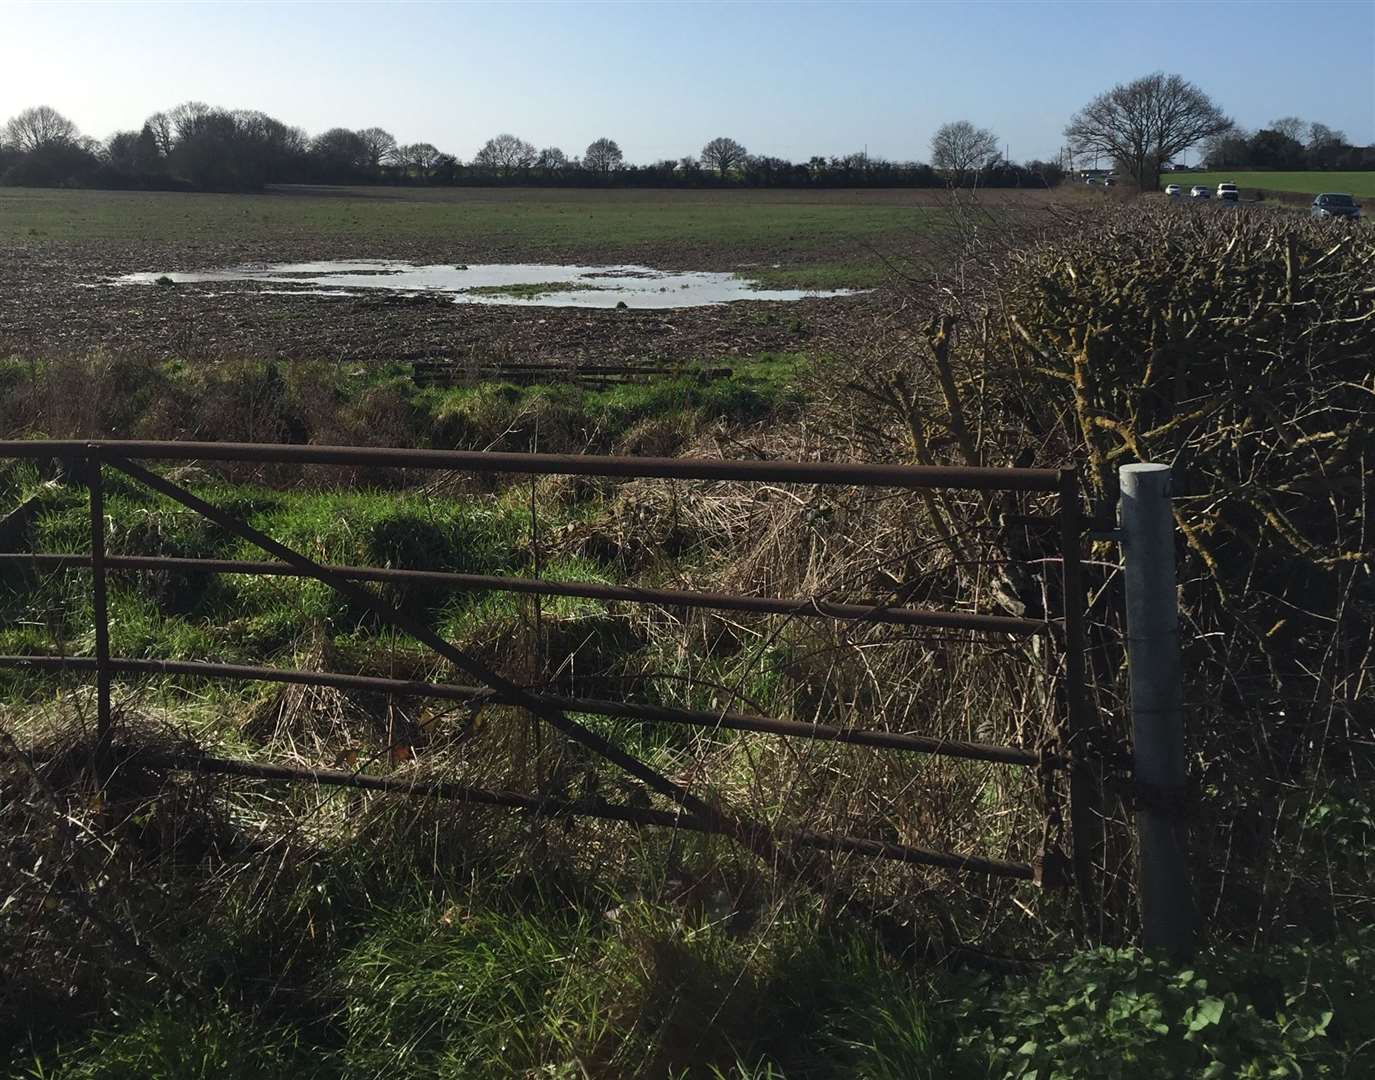 Part of the land where the 600-home Possingham Farm development could go